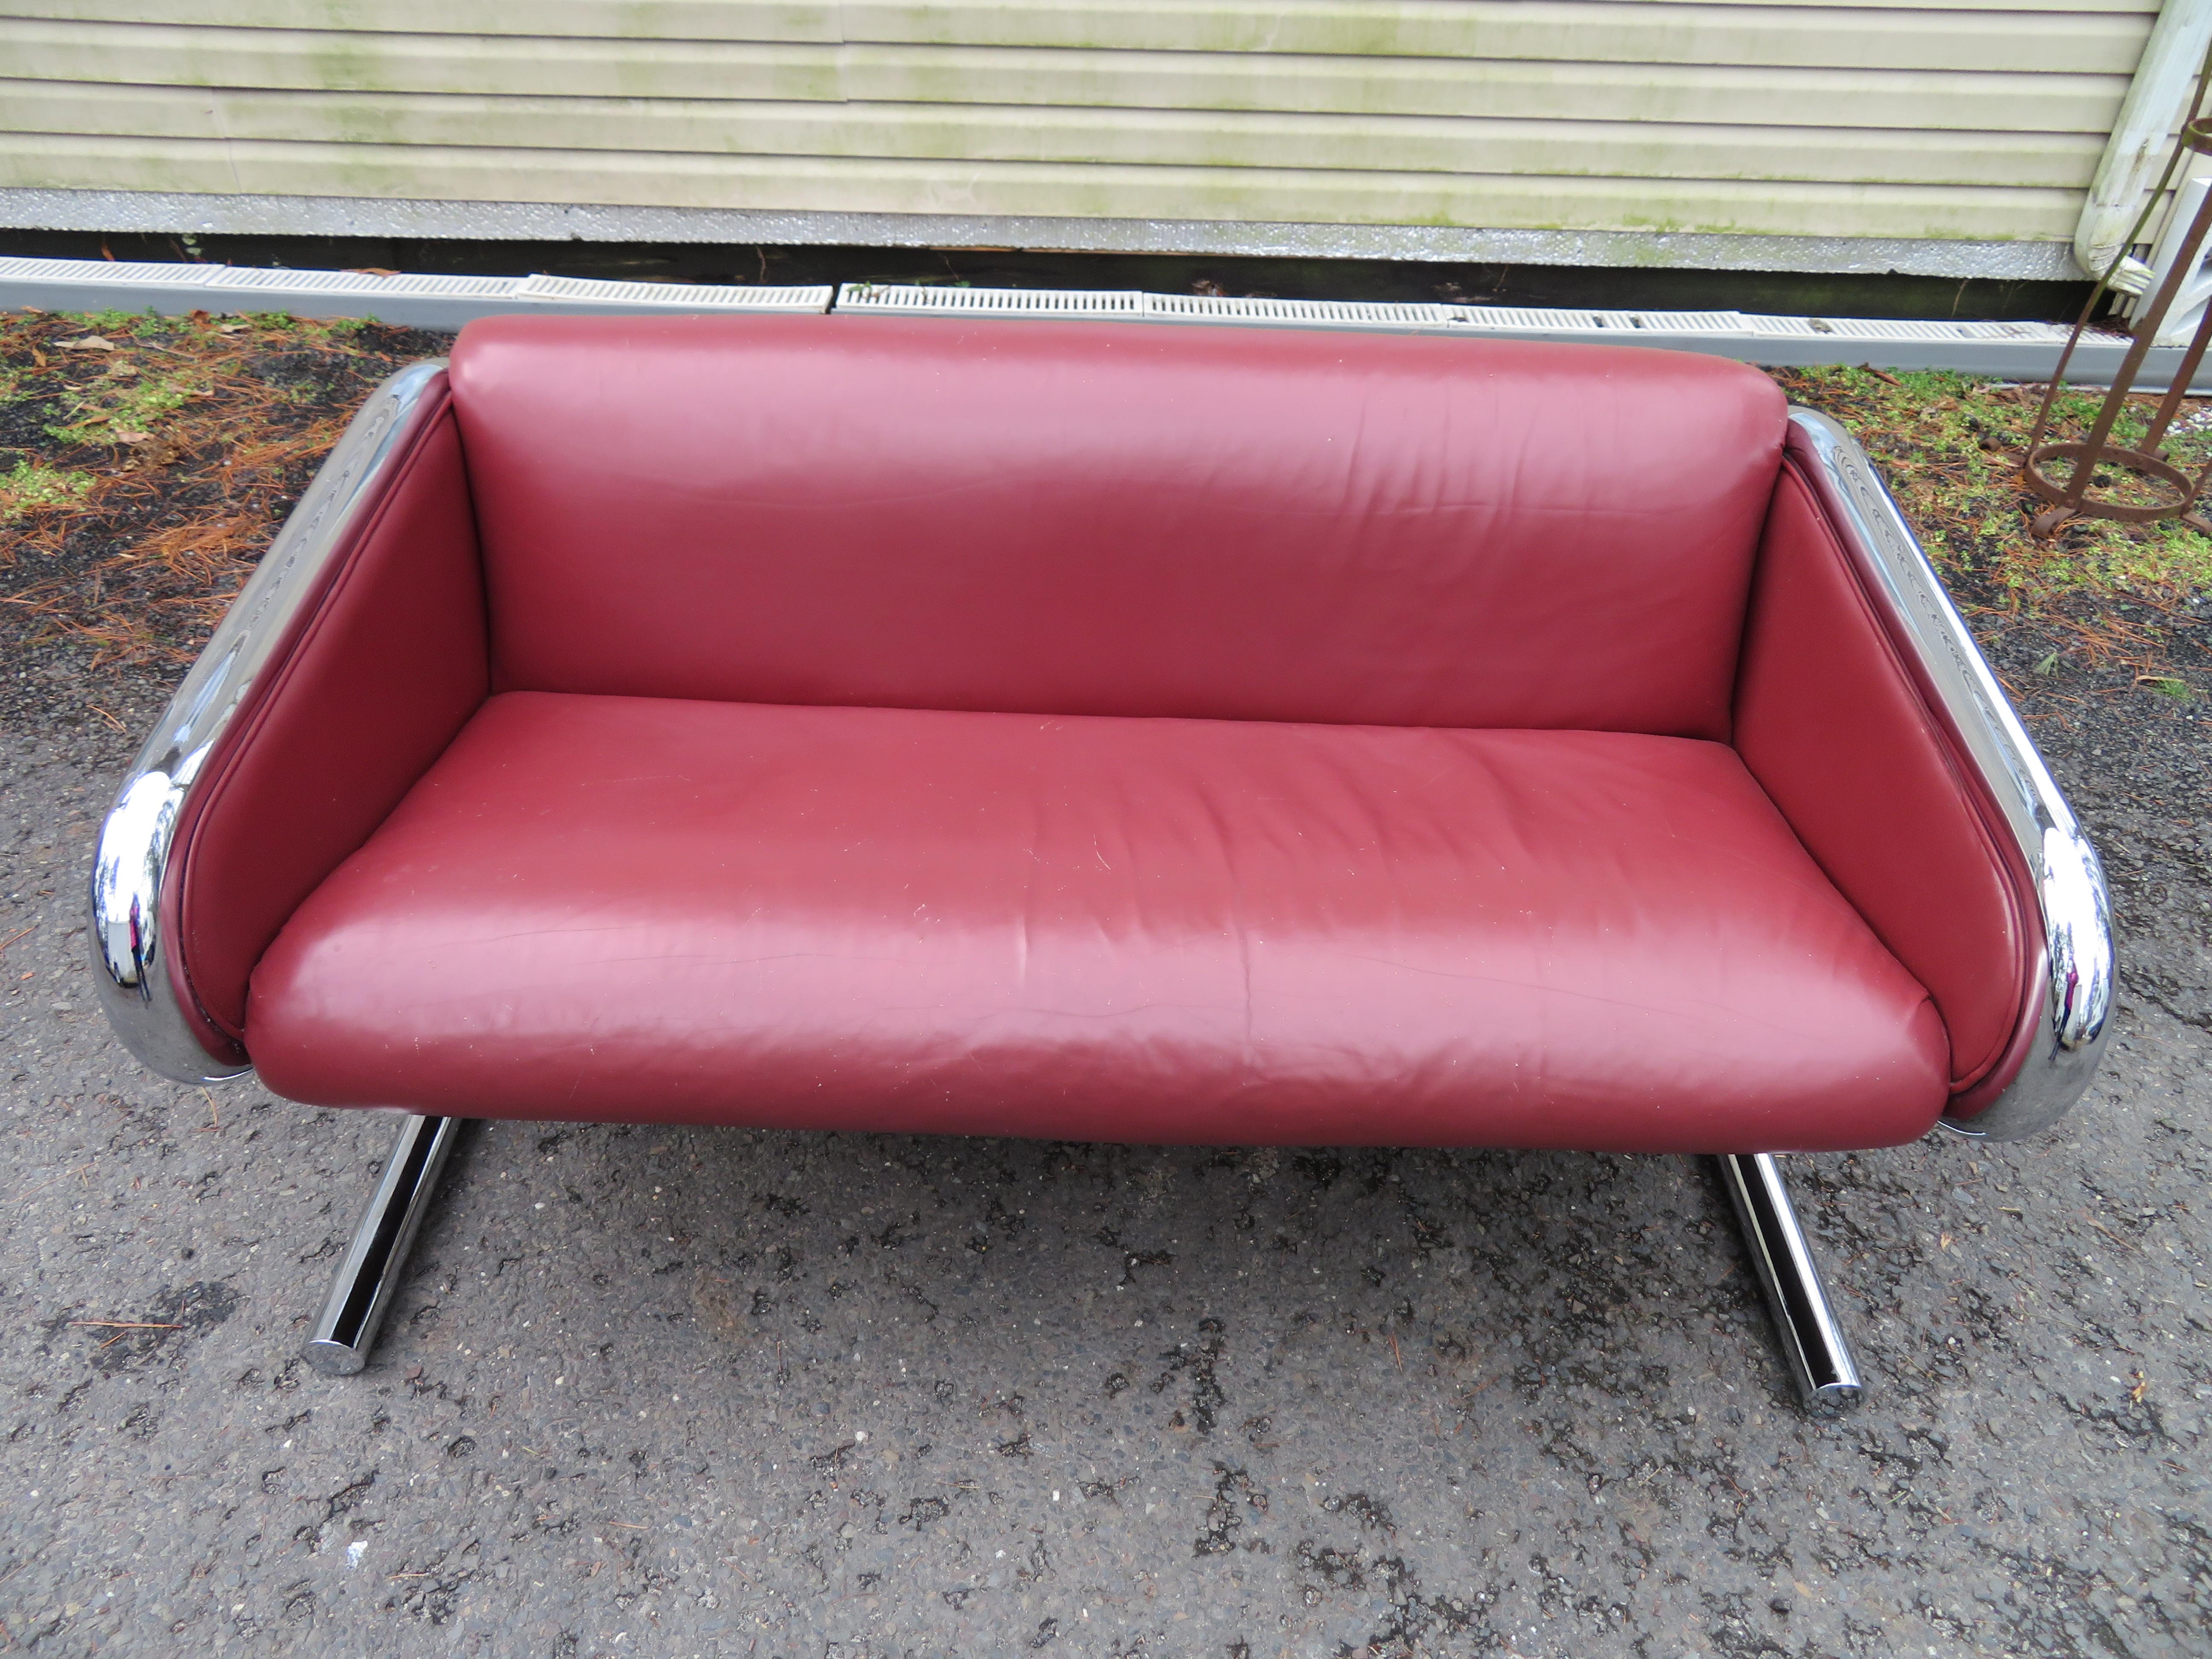 What an exceptional design! You don't hear much about Roger Sprunger, but he was at the forefront of American mid-century design being a resident designer at Dunbar for over 25 years. This settee is heavy, substantial, and ultra-luxe with the lines